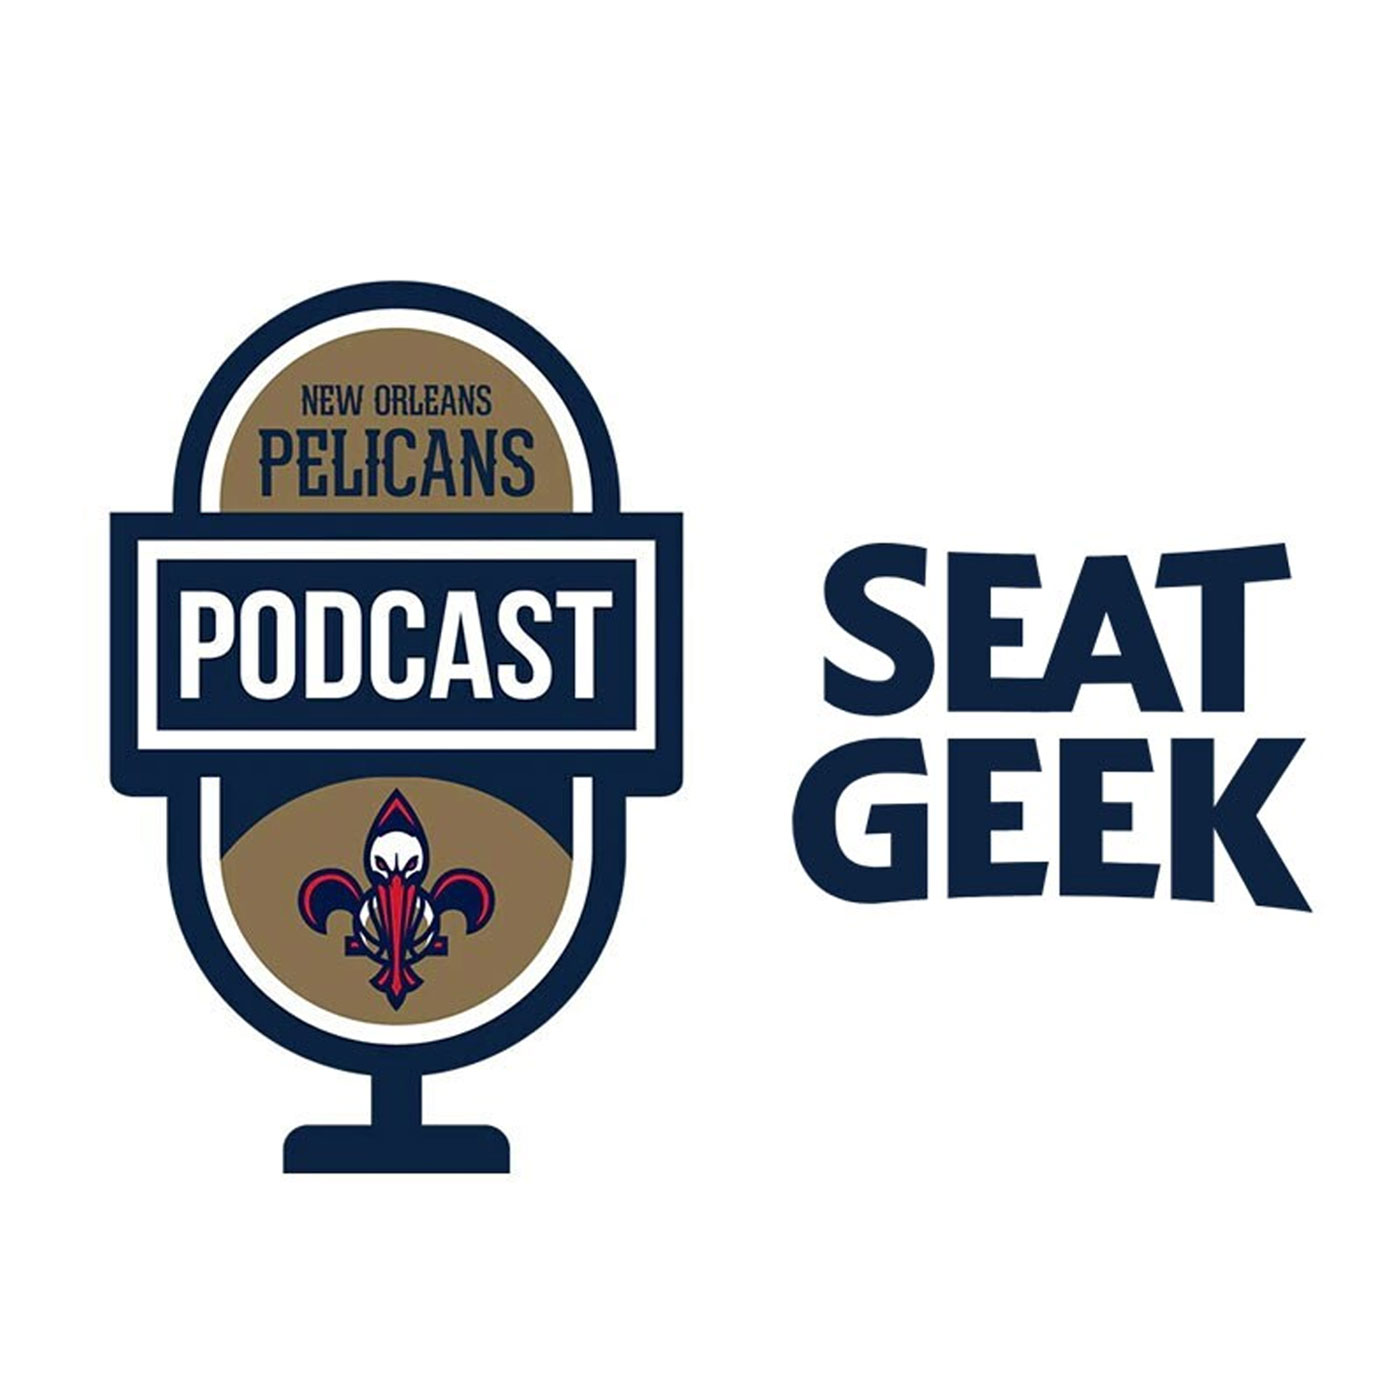 Noah Eagle on the New Orleans Pelicans Podcast presented by SeatGeek - November 19, 2021